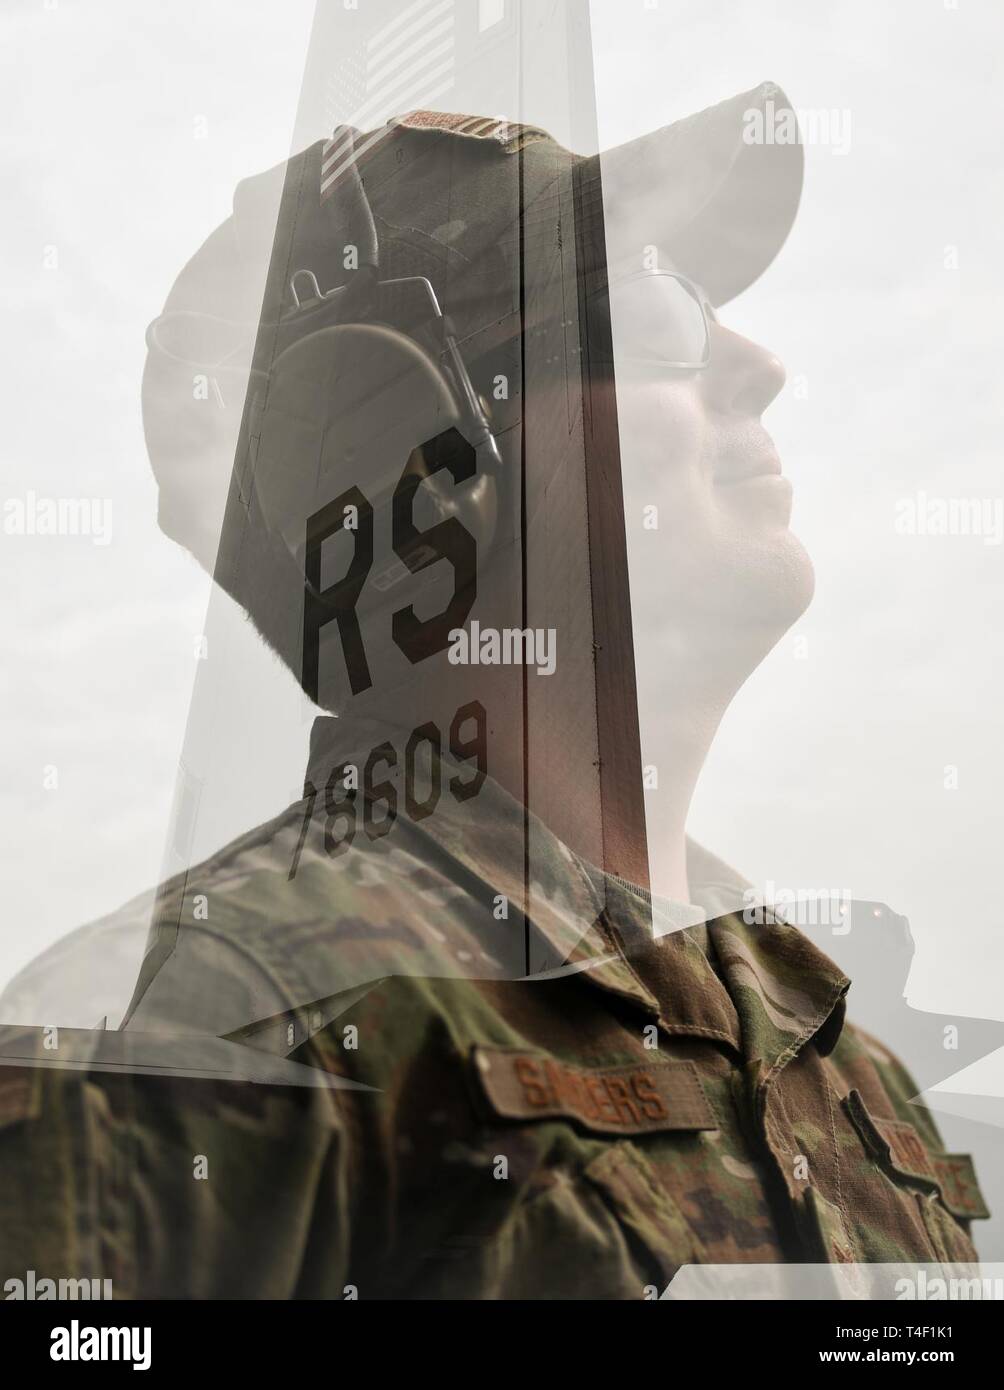 U.S. Air Force Staff Sgt. Greg Sanders, an aircraft maintainer assigned to the 75th Expeditionary Airlift Squadron, Combined Joint Task Force-Horn of Africa (CJTF-HOA), stands for an in-camera double exposure portrait at Maputo International Airport, Mozambique, March 27, 2019, for the U.S. Department of Defense’s relief effort in the Republic of Mozambique and surrounding areas following Cyclone Idai. Teams from CJTF-HOA, which is leading DoD support to relief efforts in Mozambique, began immediate preparation to respond following a call for assistance from the U.S. Agency for International D Stock Photo